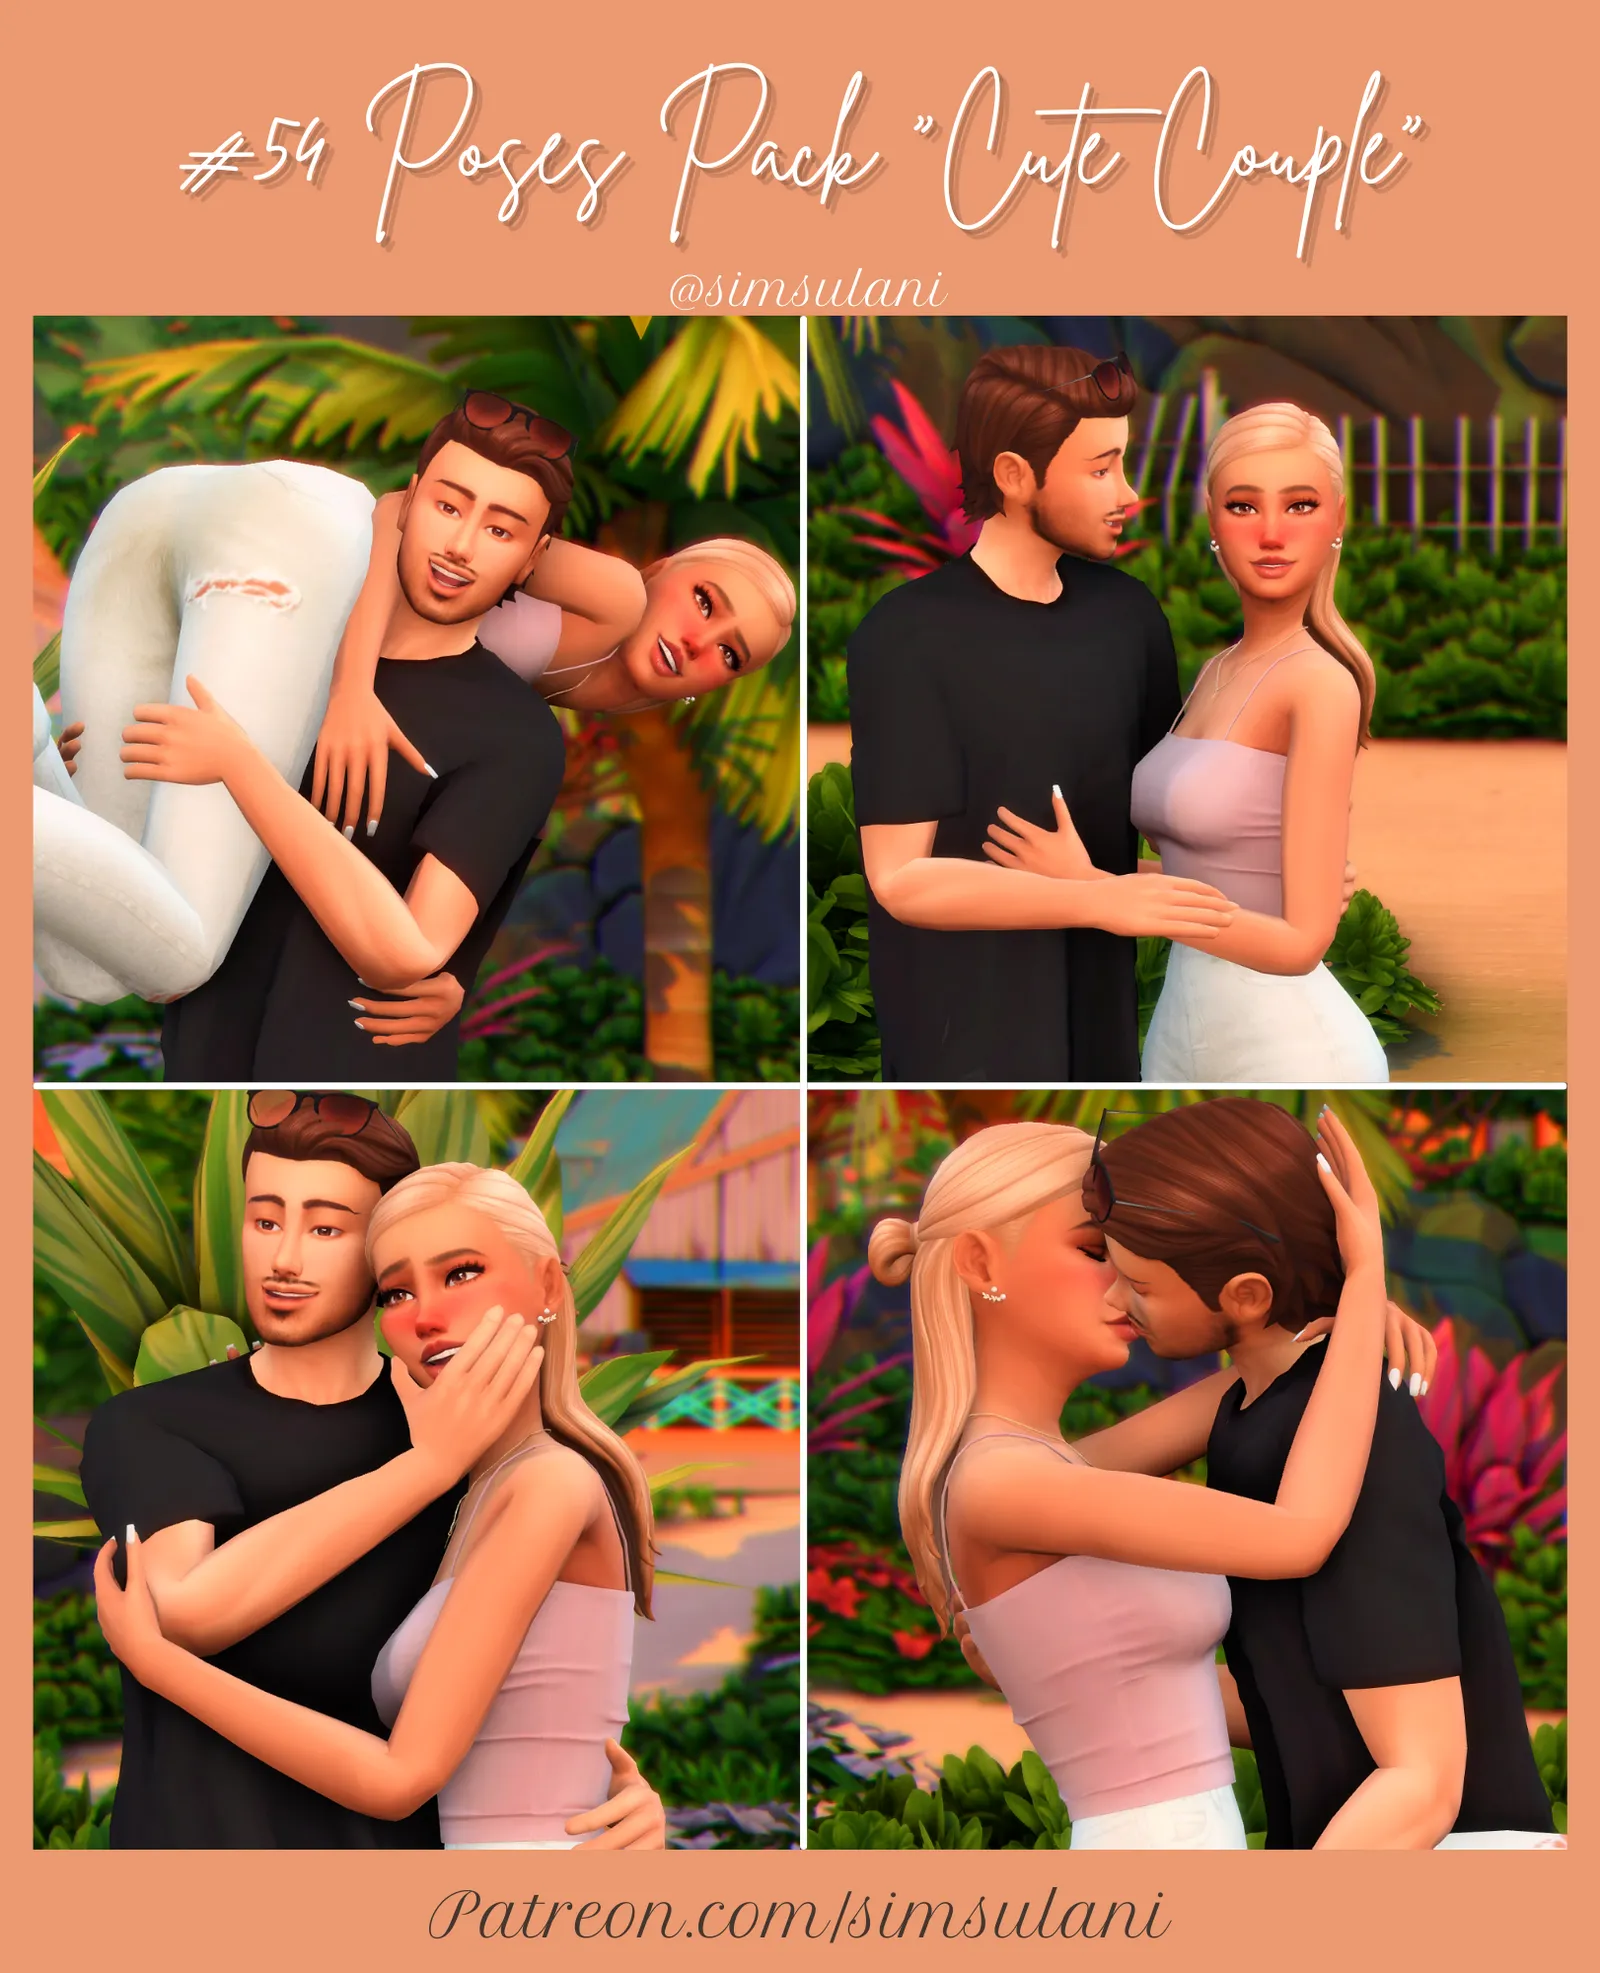 #54 Poses Pack "Cute Couple" 